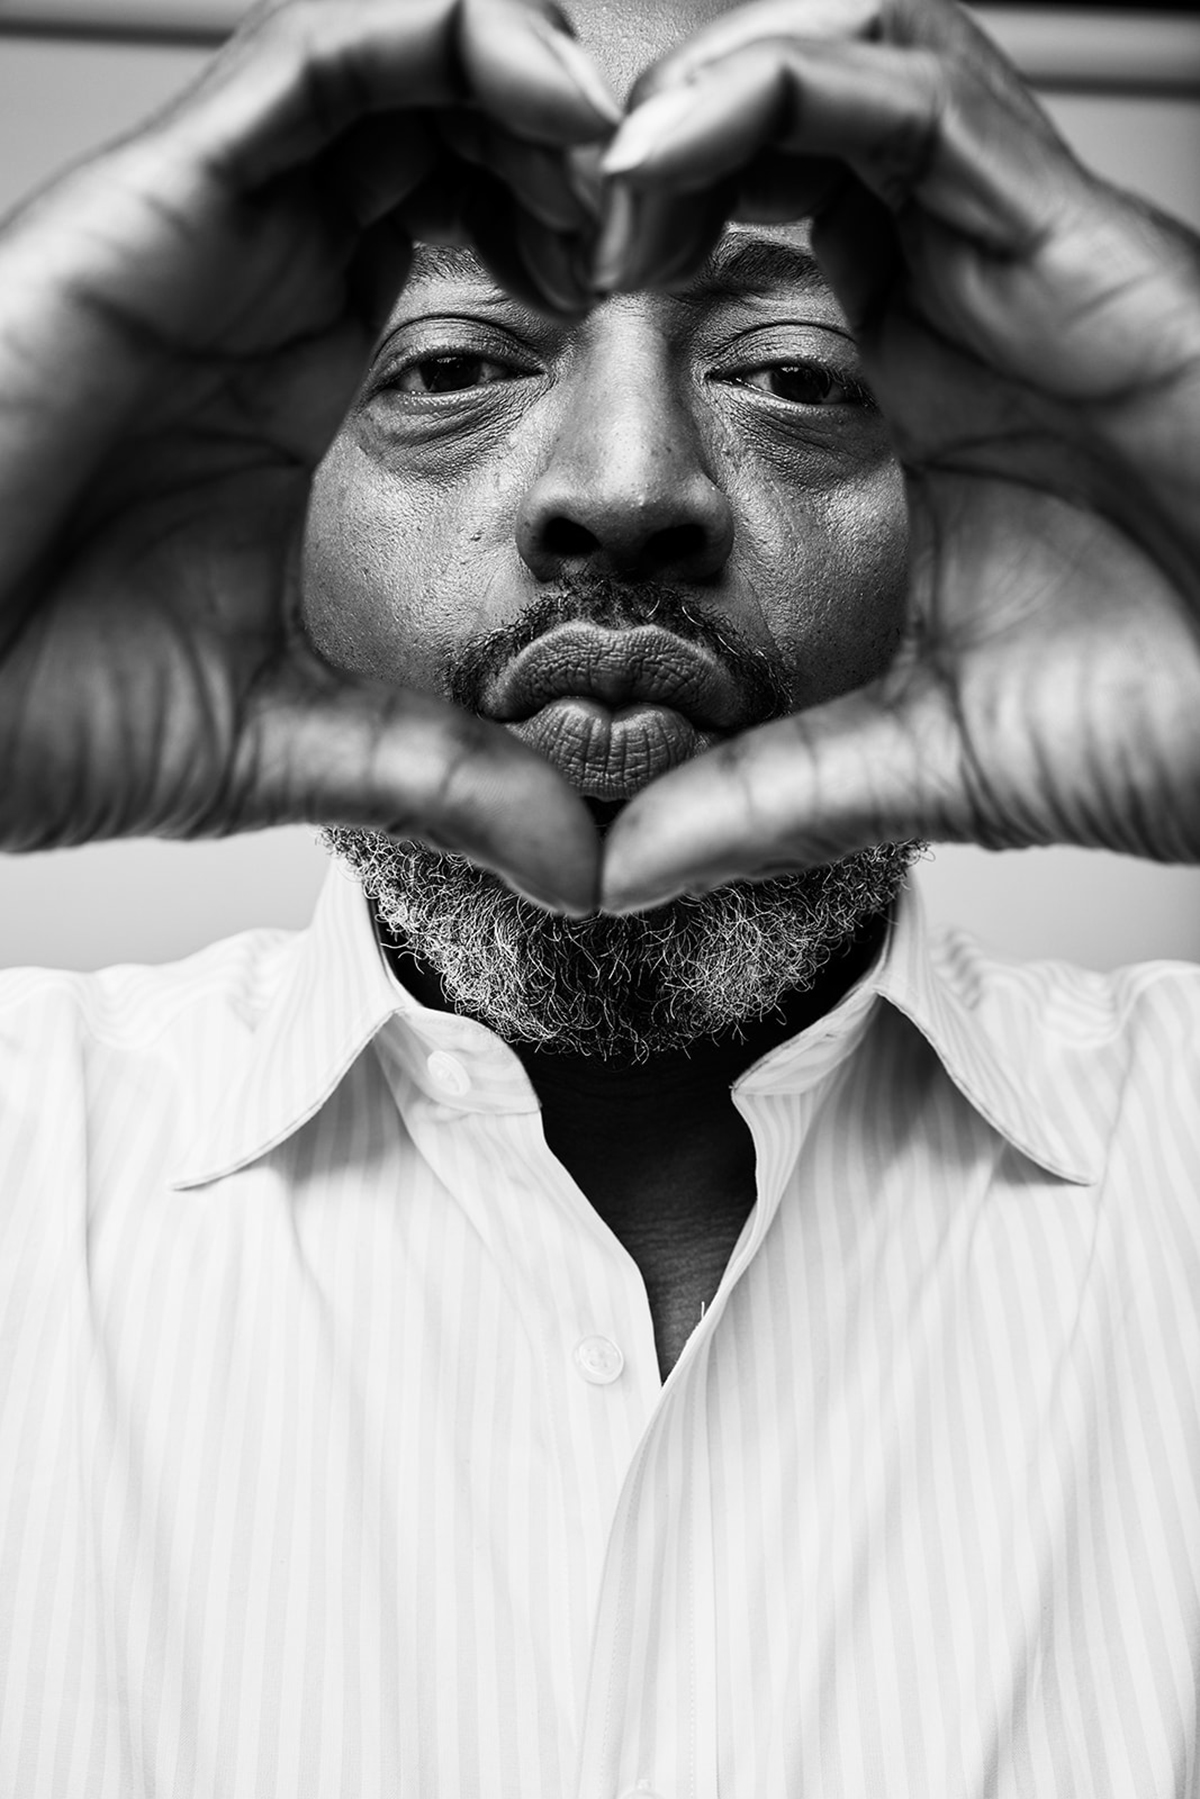 Comedian Donnell Rawlings has his eye on the future. - Image by Paul Smith